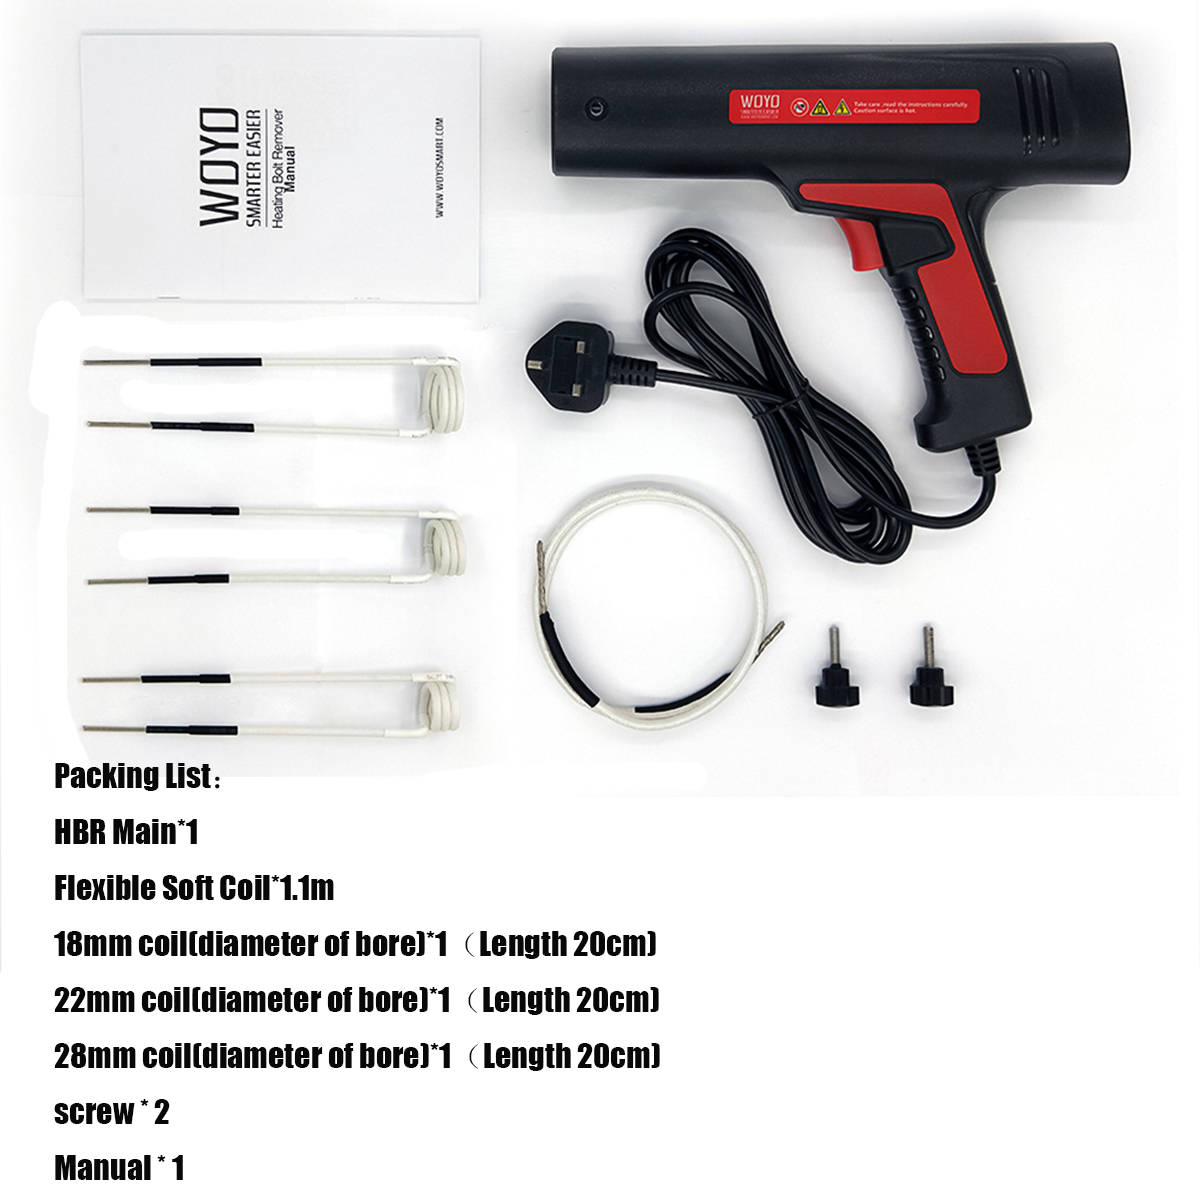 WOYO-900W-Rusty-Nut-Screw-Remover-Ductor-Magnetic-Induction-Heater-Kit-Automotive-Flameless-Heat-1336959-10